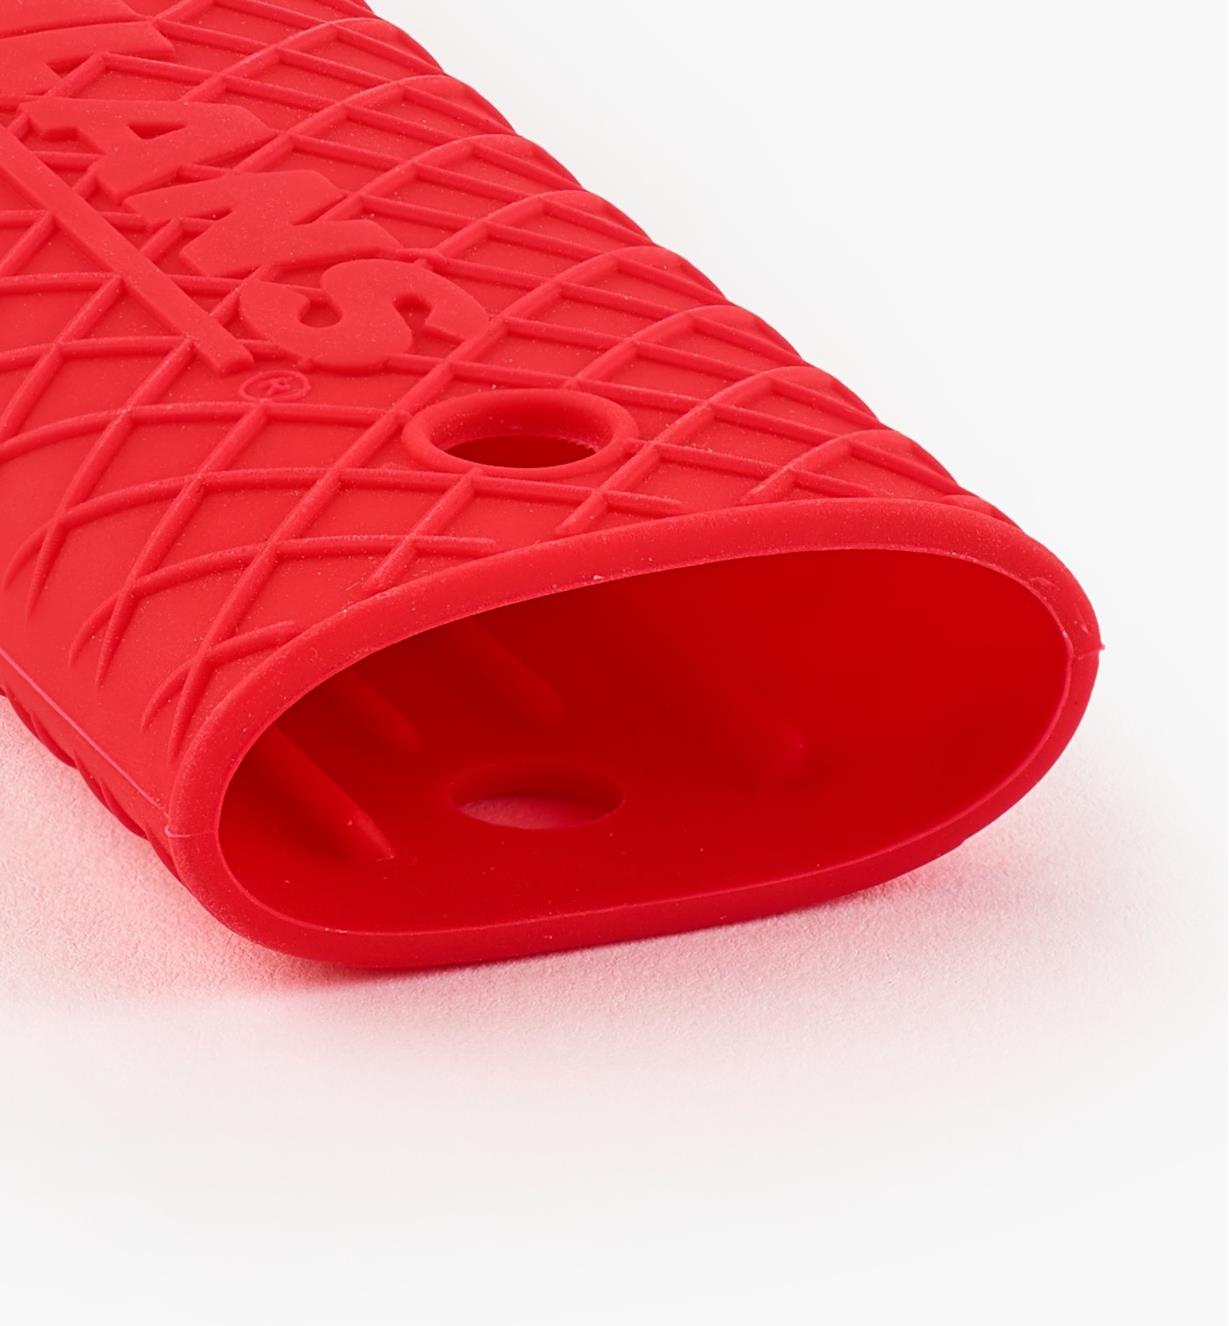 Detail of exterior grip texture and interior ridges of silicone cast-iron handle grip